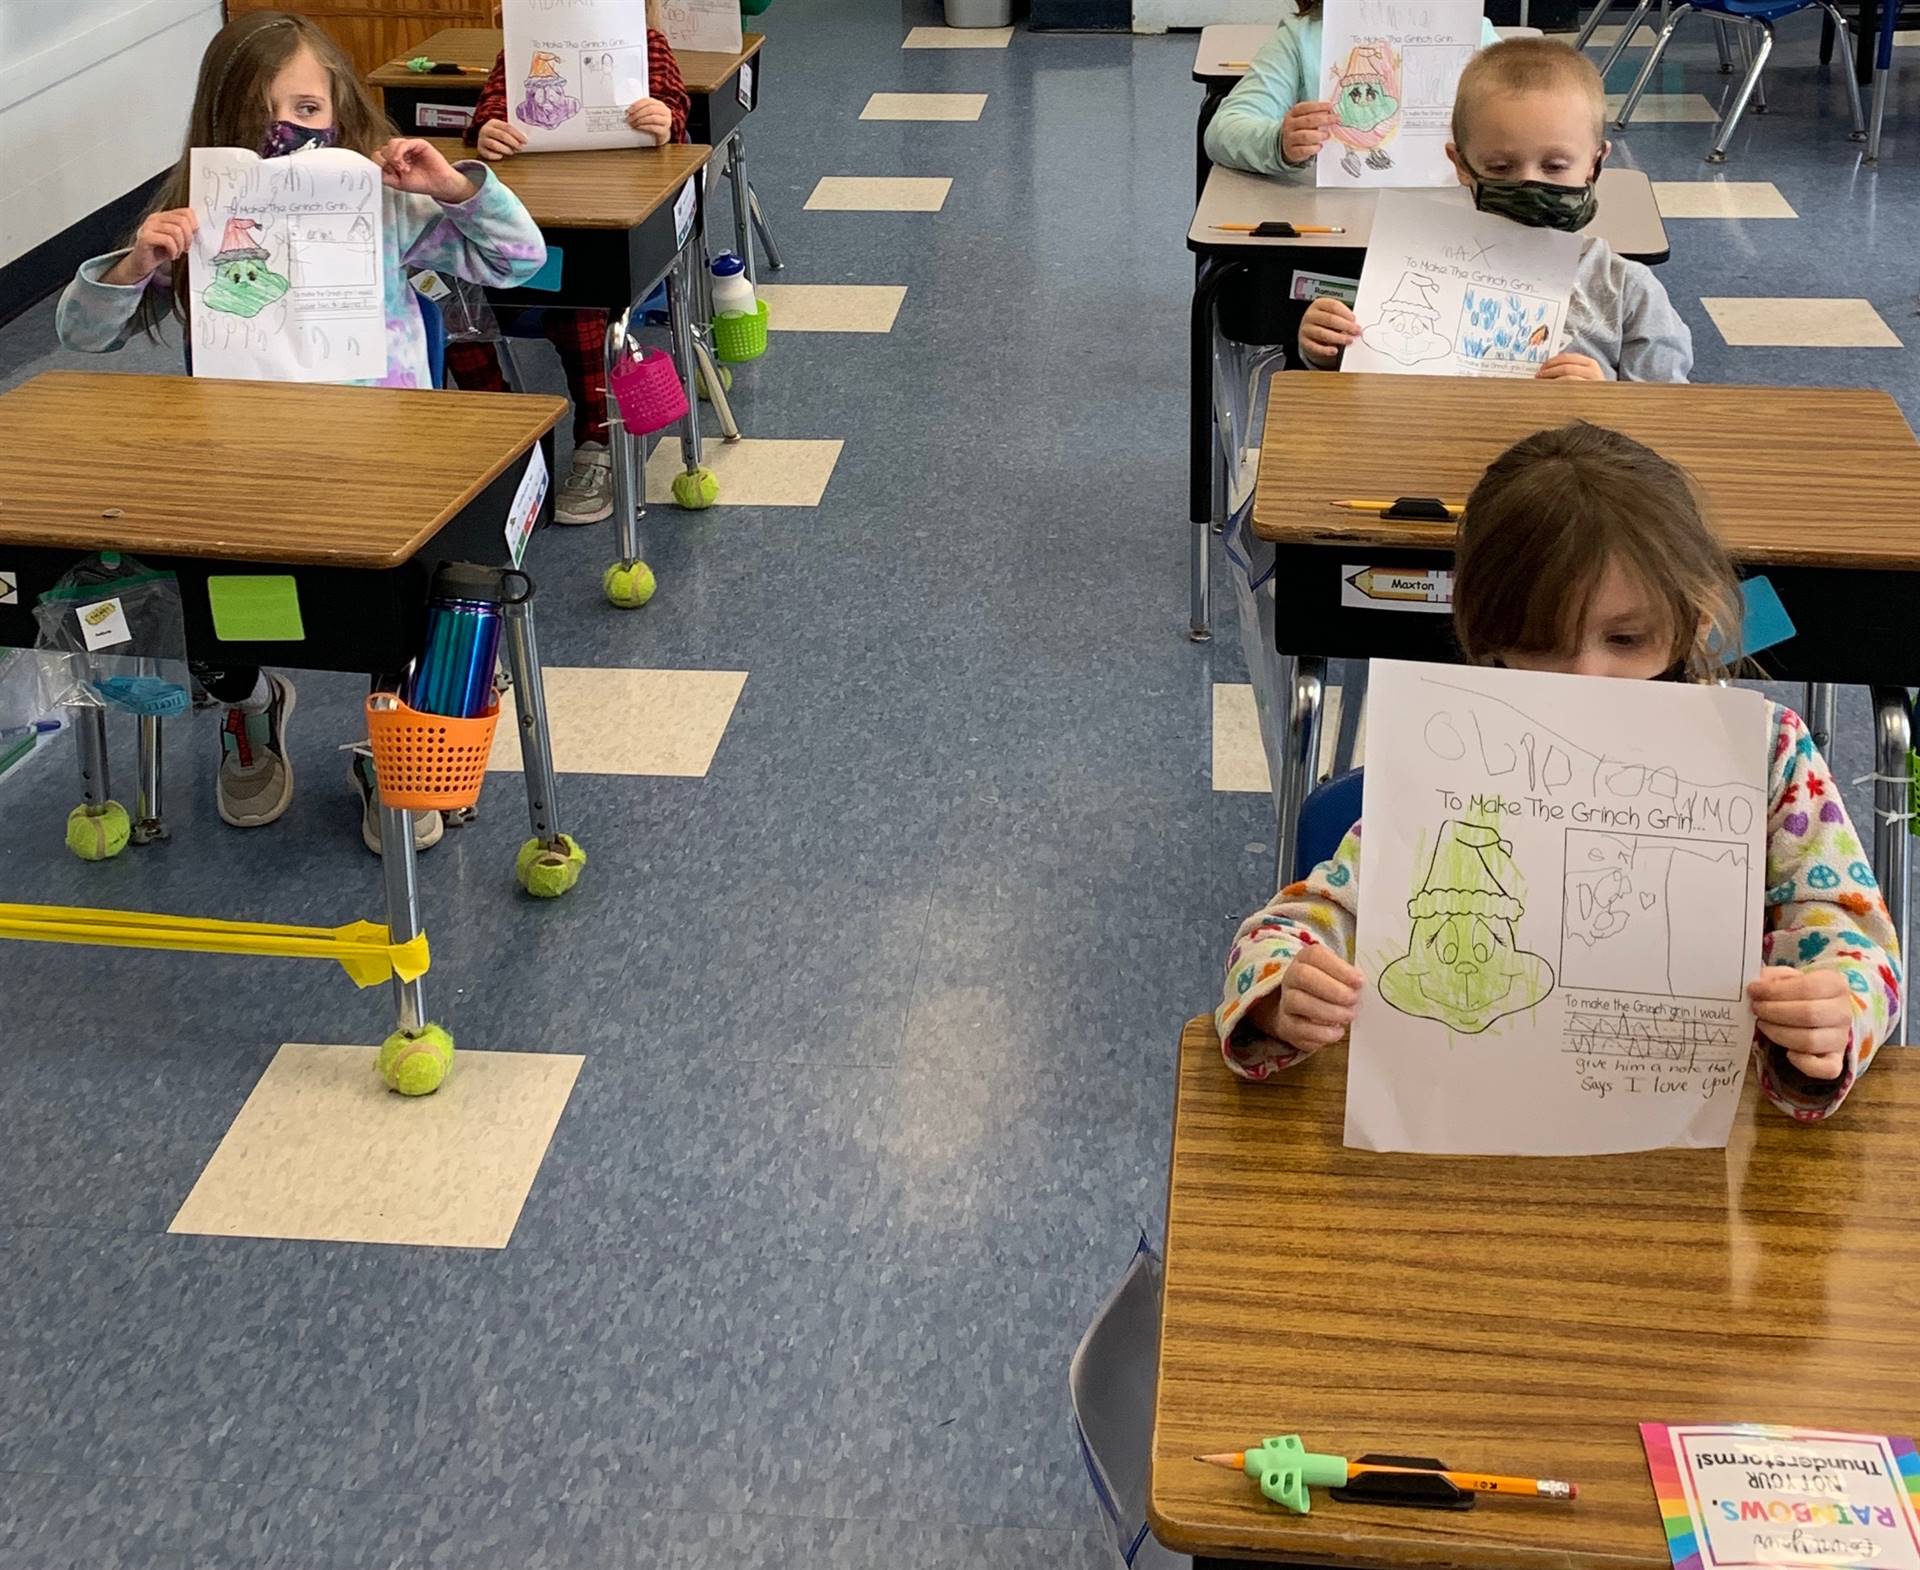 Students hold up pictures of grinch with words "I can make the grinch grin by"